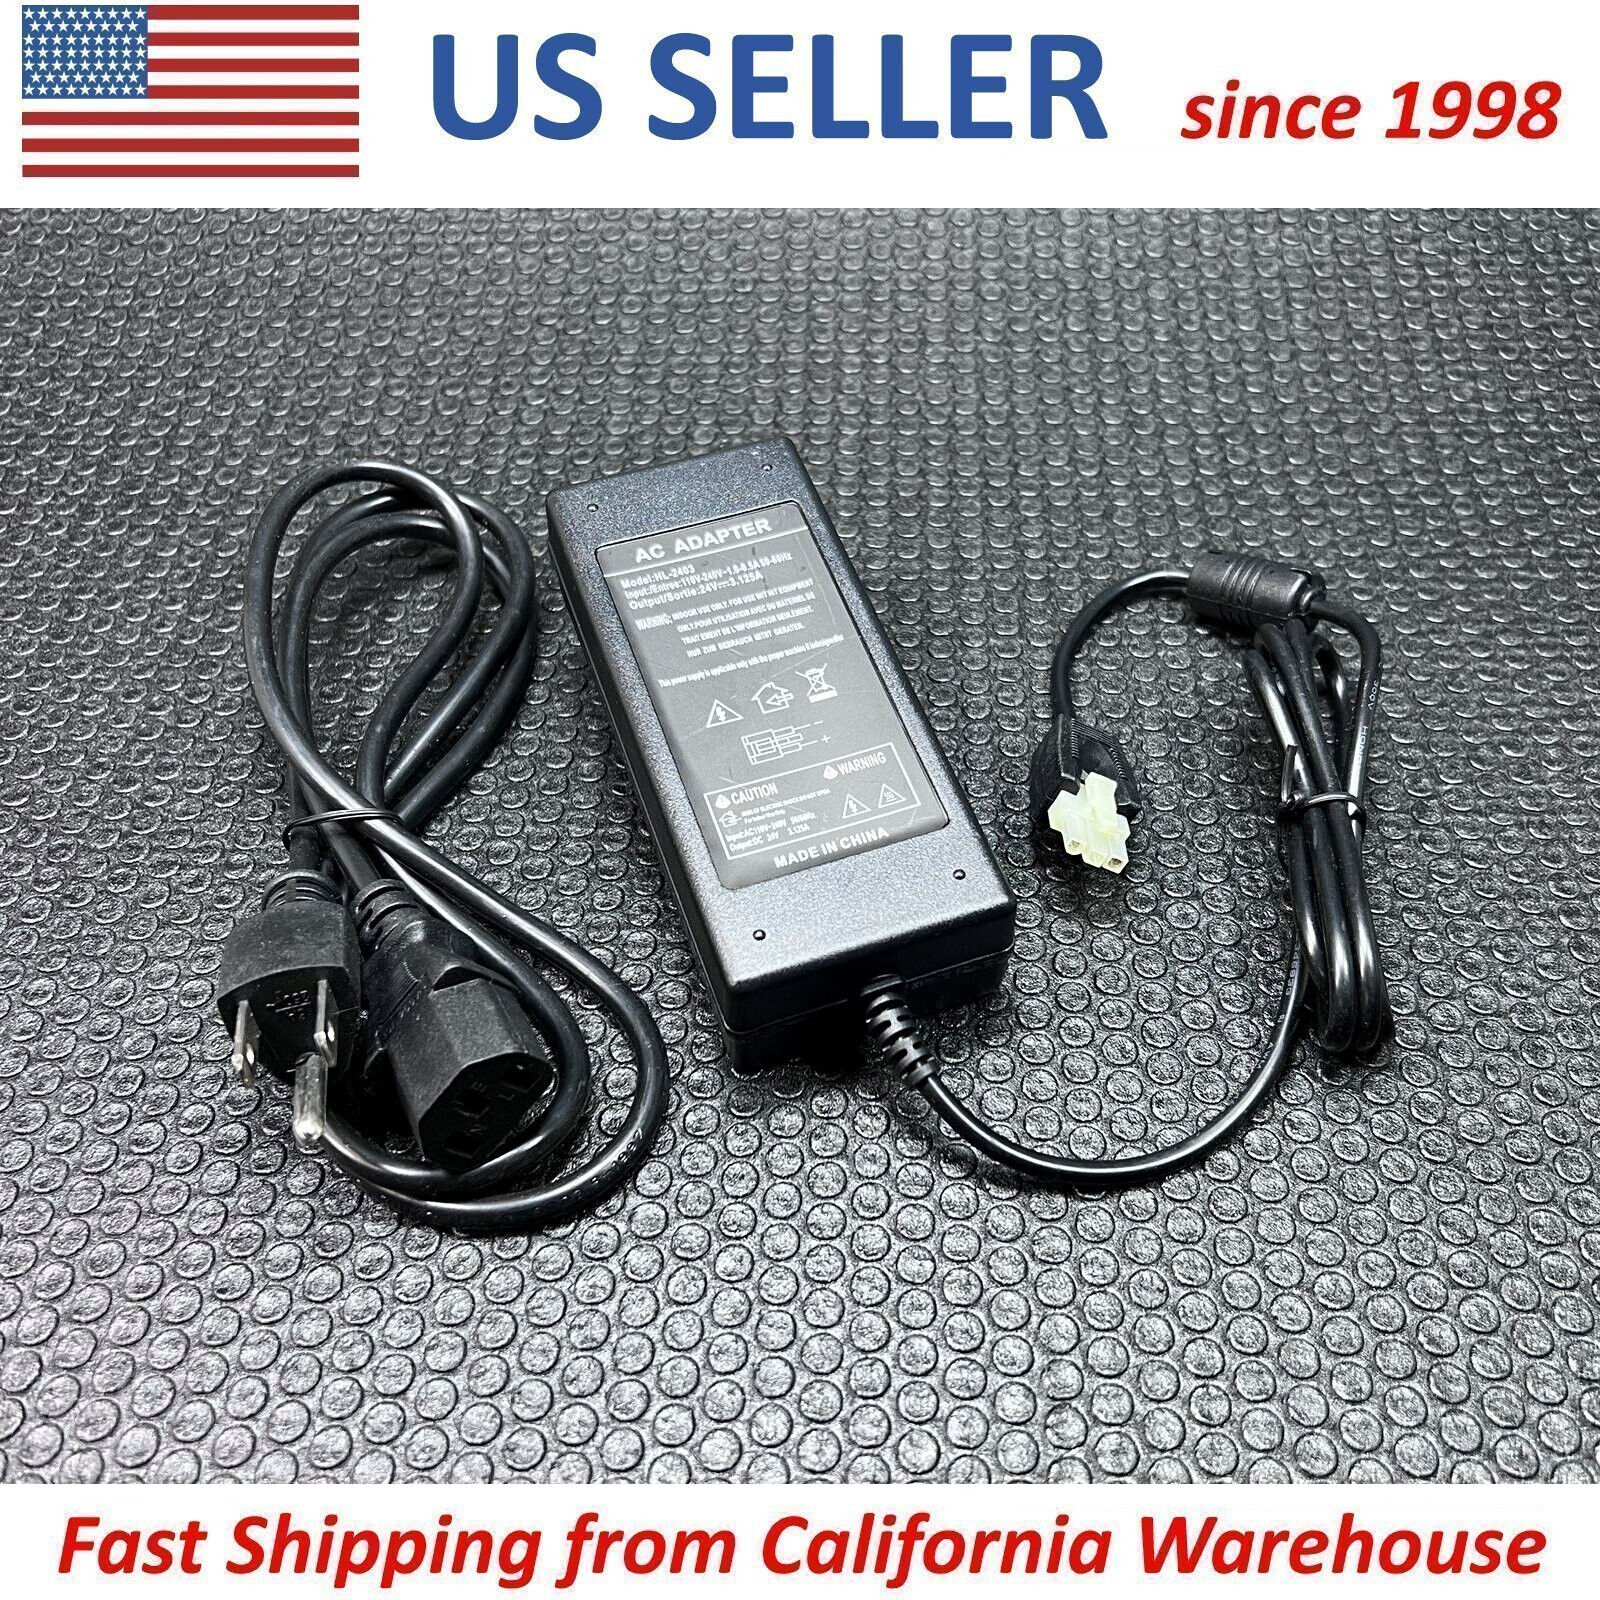 NEW 24V AC Power Supply Adapter for IBM 4610-2CR Replace TG-7601 40N5050 40N5051